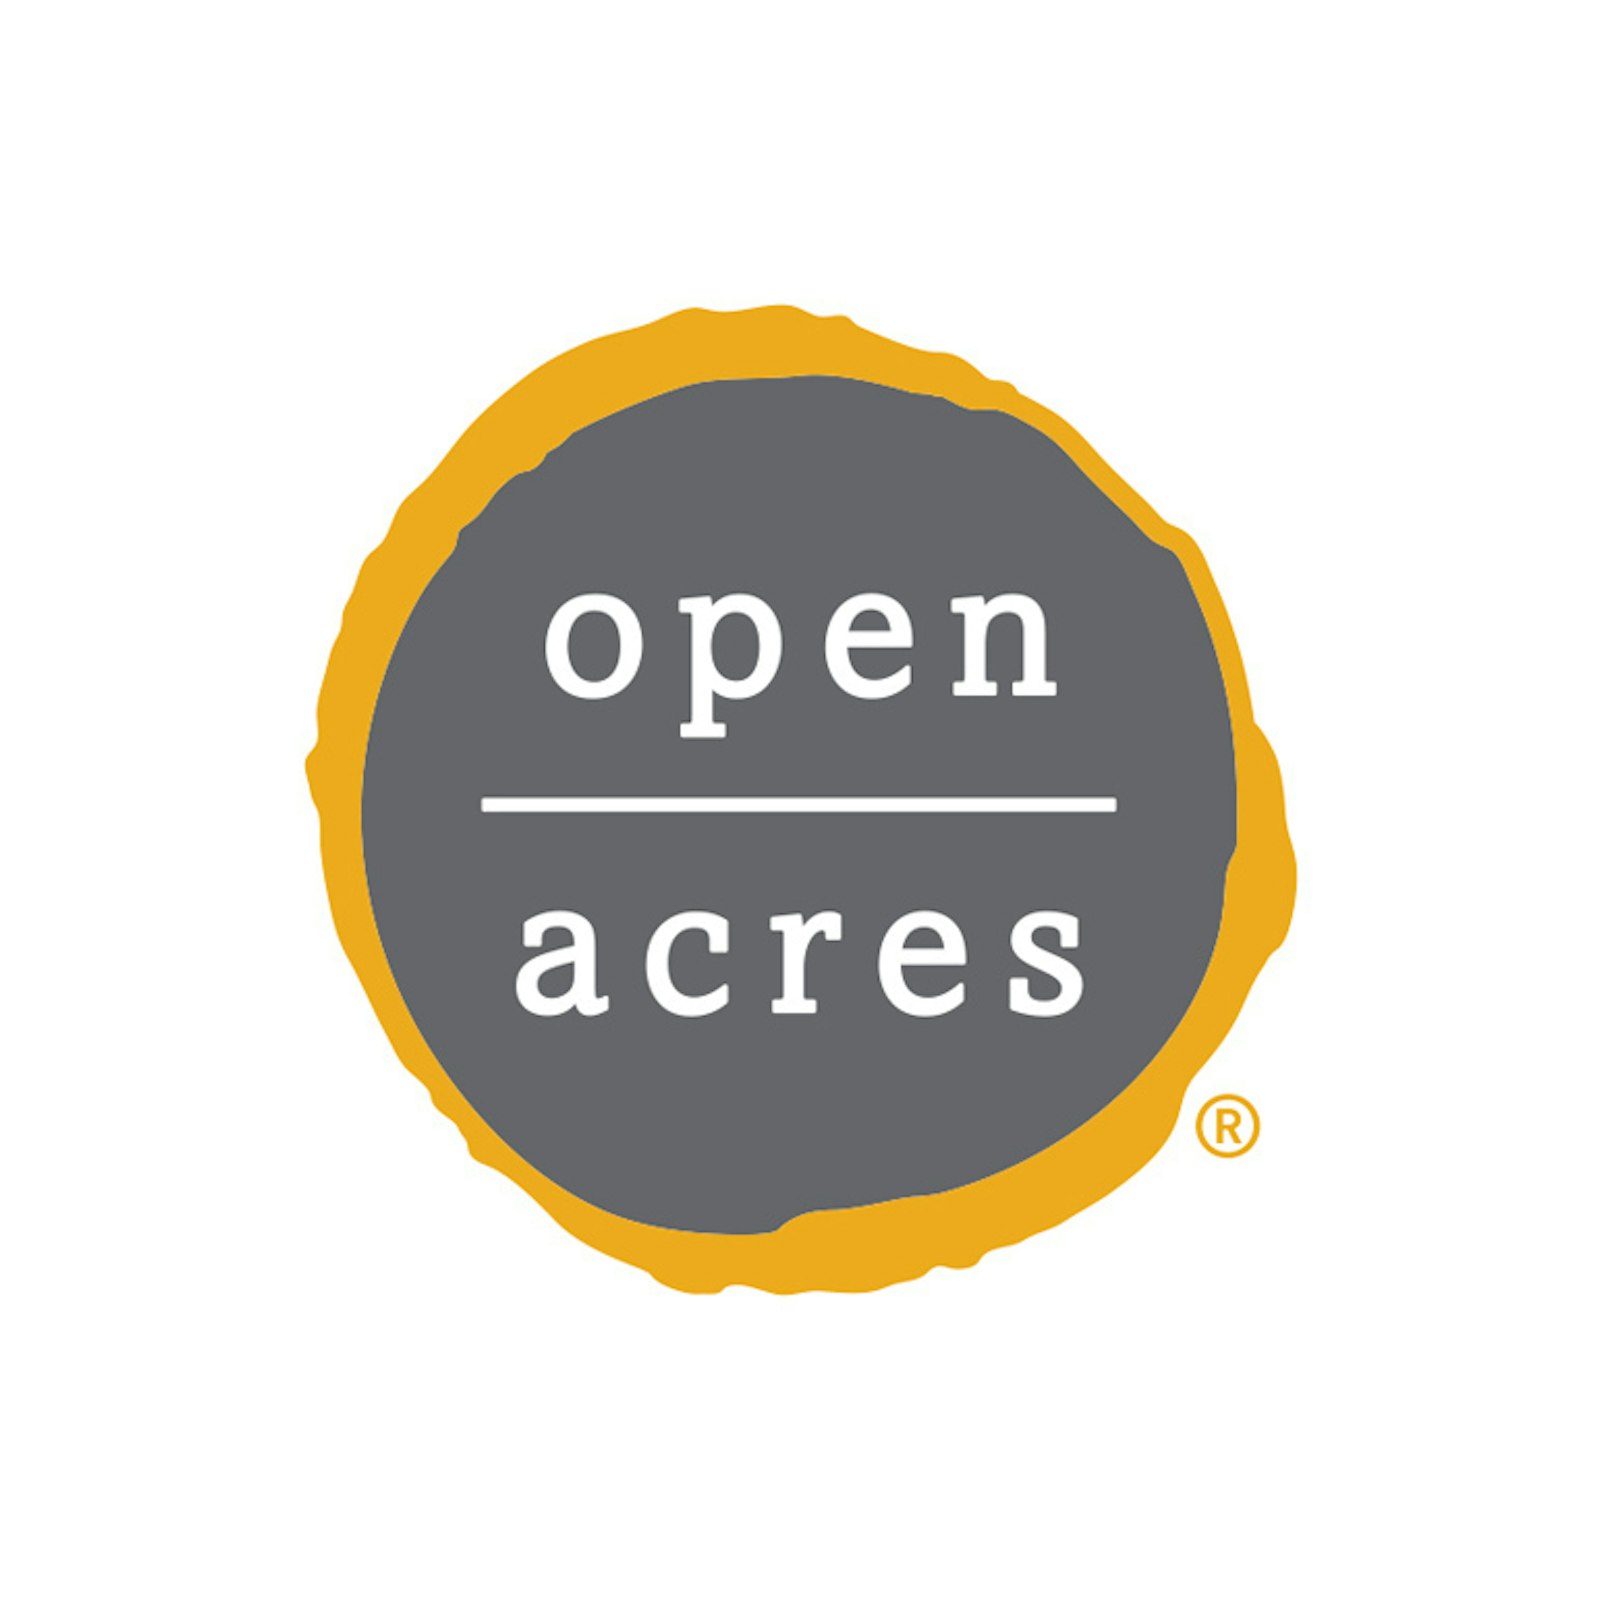 The Open Acres brand logo design with white type on grey and yellow circular background.